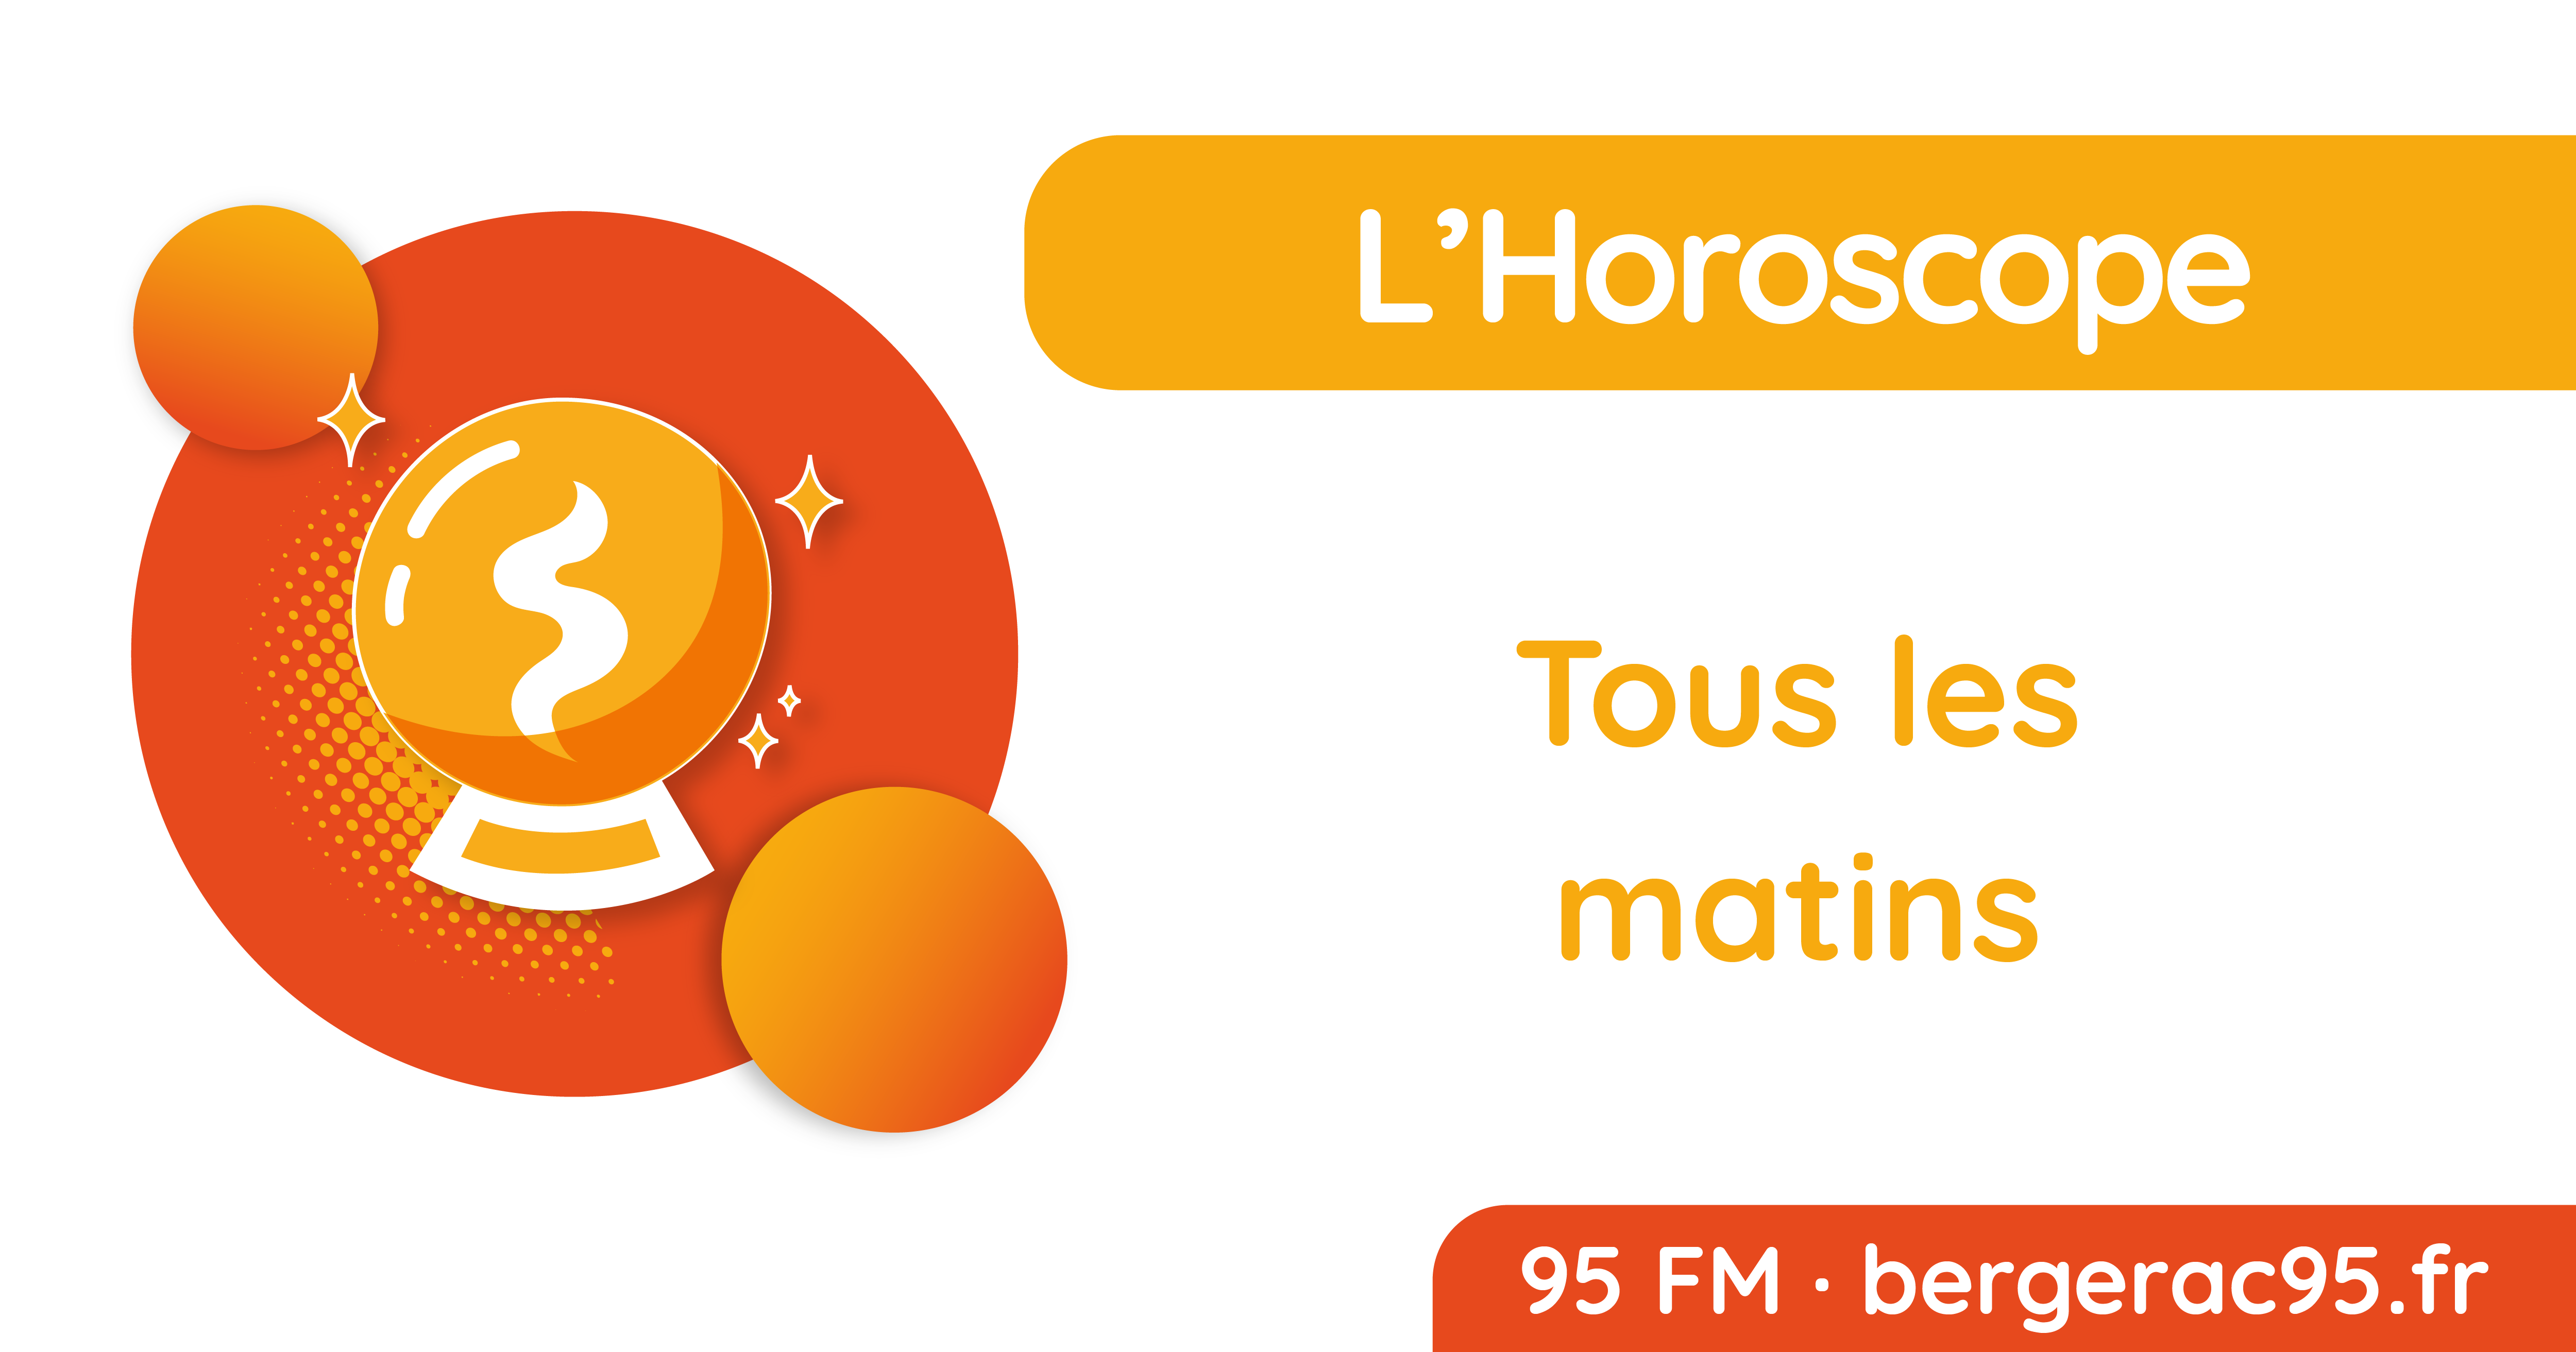 You are currently viewing HOROSCOPE DU MARDI